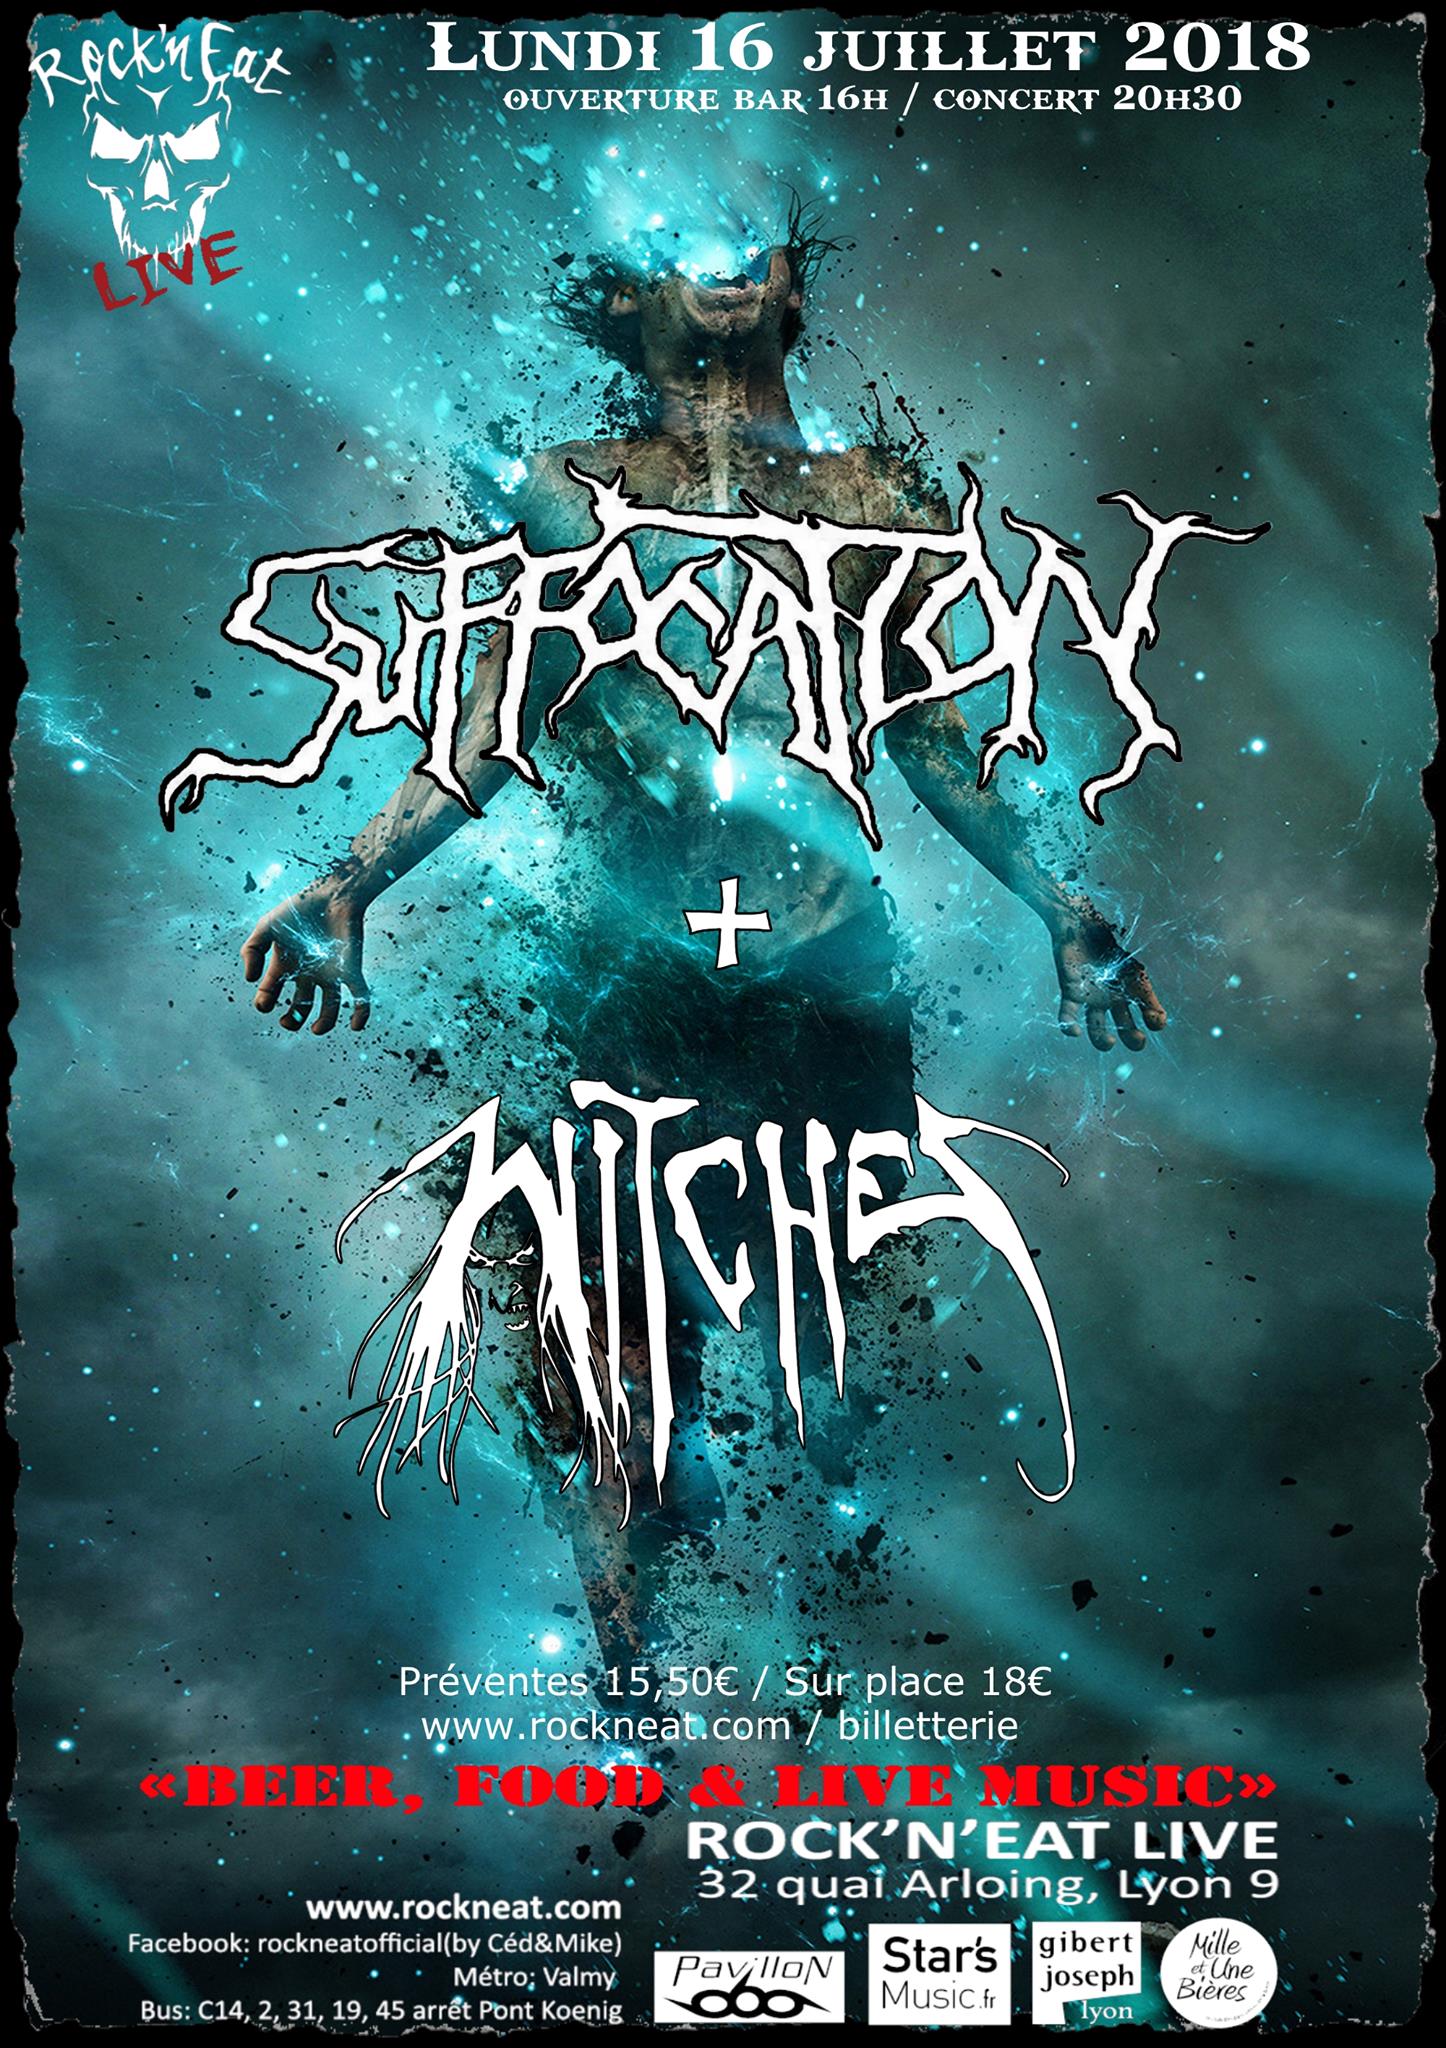 Witches flyer Suffocation + Witches  @ Suffocation (Realm of Darkness European Tour: Part 2) / Witches Suffocating Summer Tour 2018 Rock n Eat Live Lyon, France